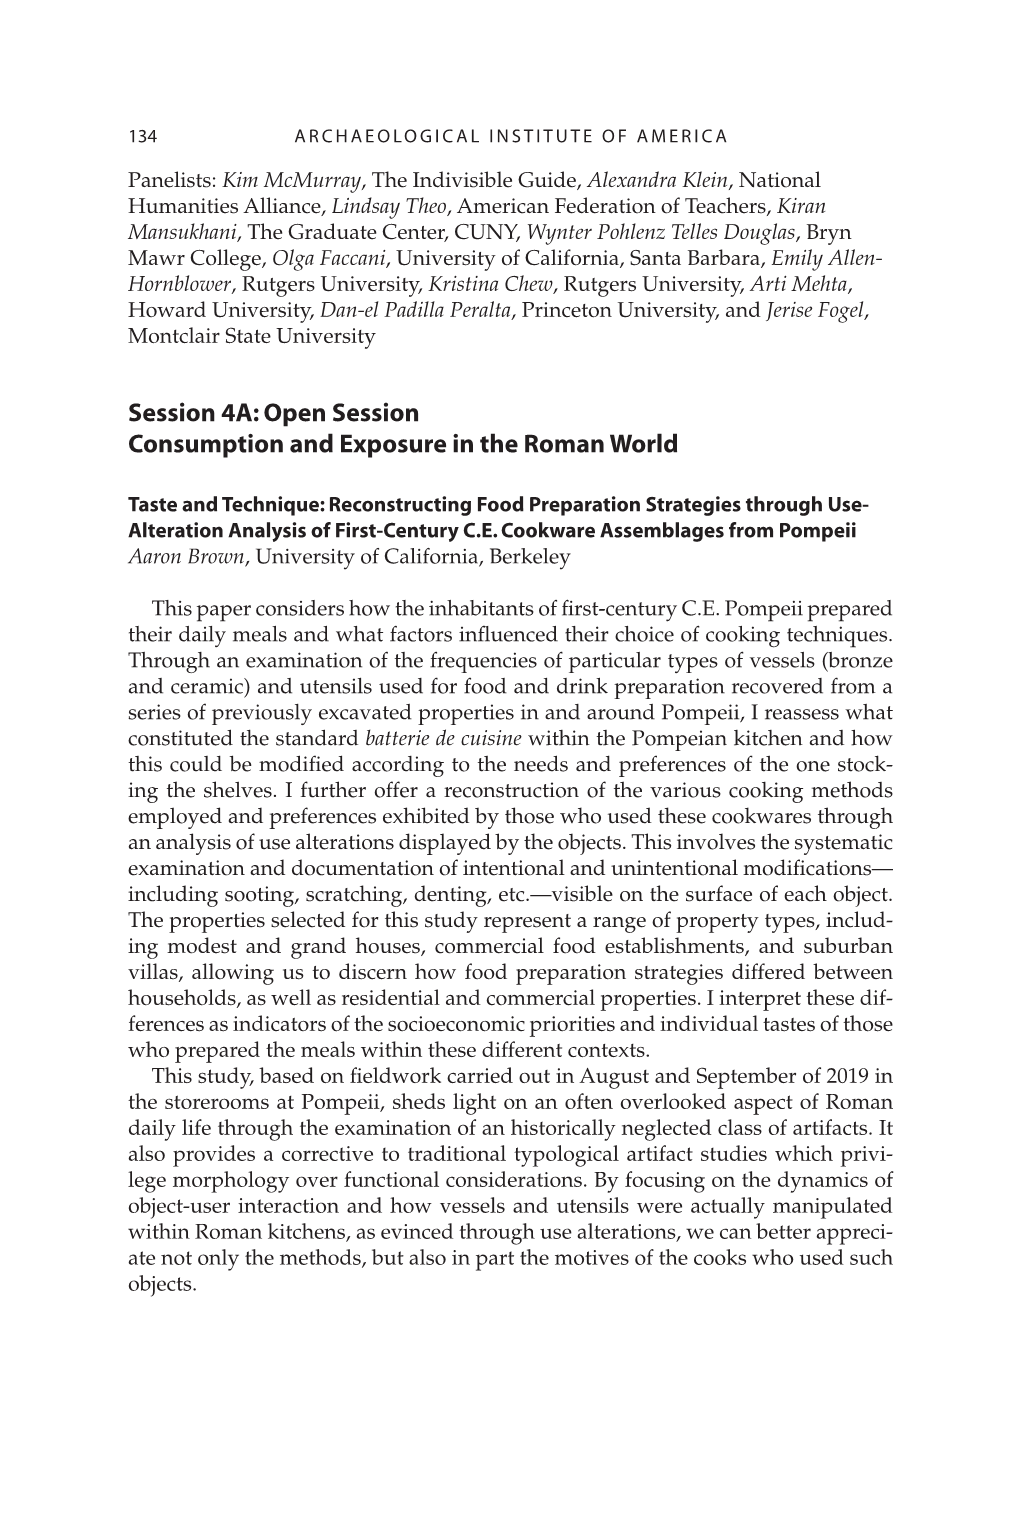 Session 4A: Open Session Consumption and Exposure in the Roman World